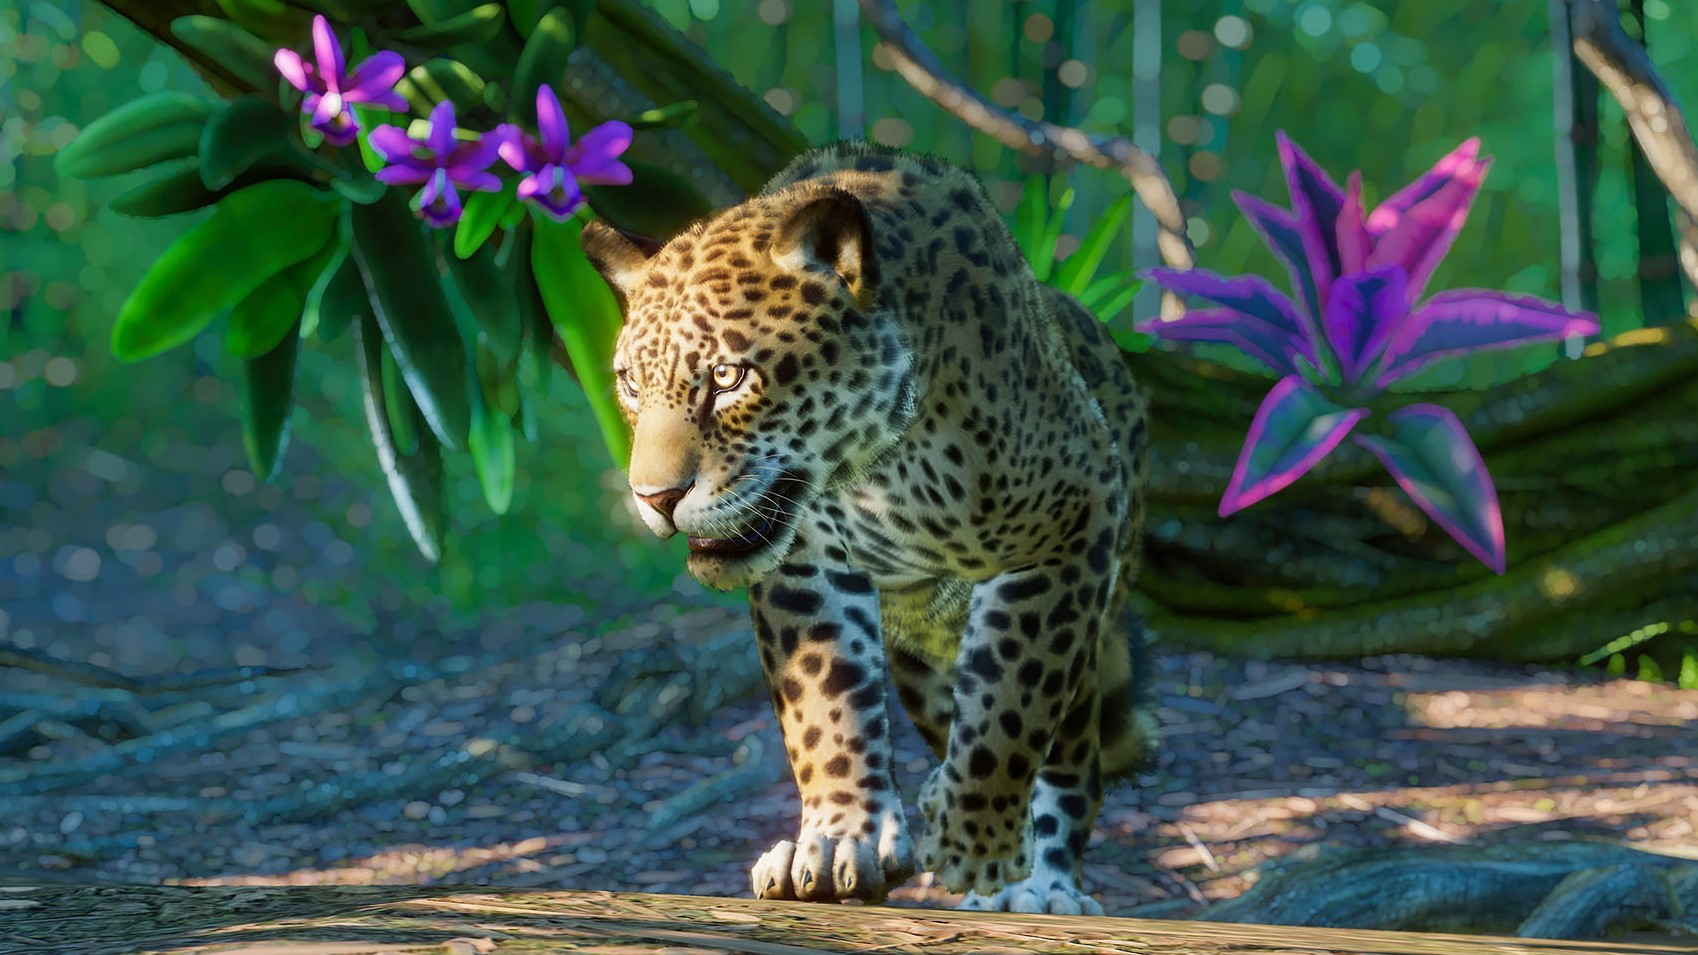 Planet Zoo's South America DLC is out now, adds five new animals